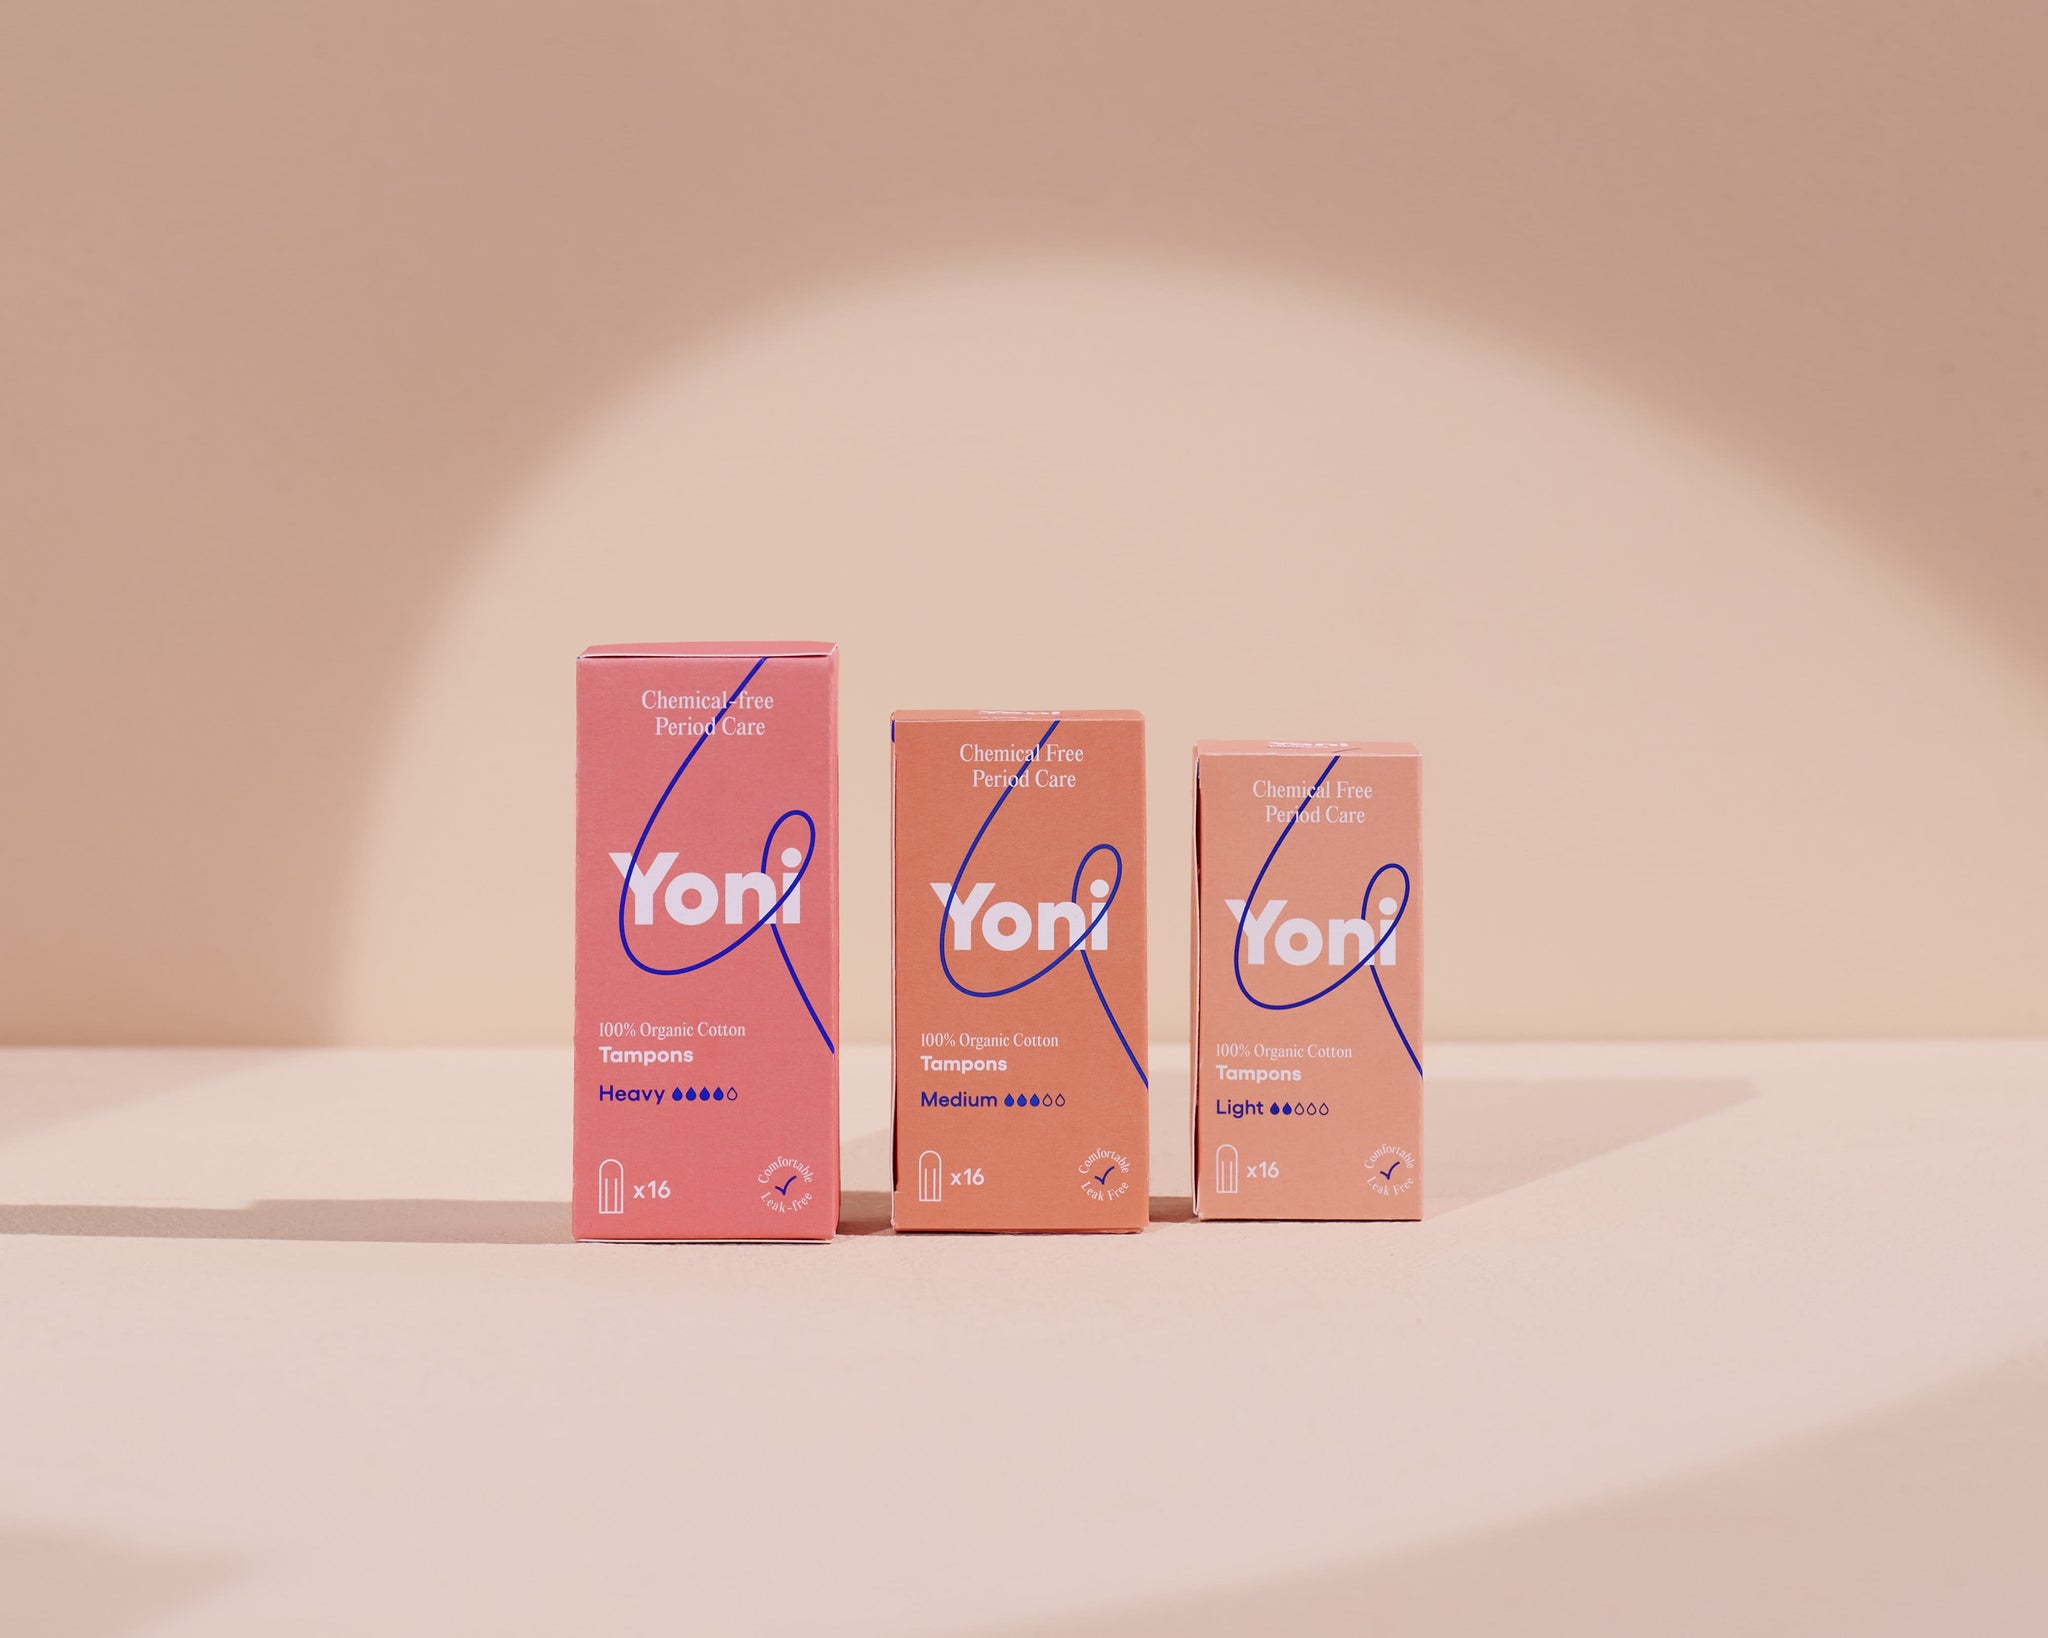 Yoni Applicator Tampons,Light, Small, Comfortable, Leak Free, 100% Organic,Biodegradable, Compostable, Cotton, Sustainable Living, Eco Sanitary Products, Period Care, No Plastic Films, Hypoallergenic, Care Free Period, Chemical Free, Nourished, Nourishedeu